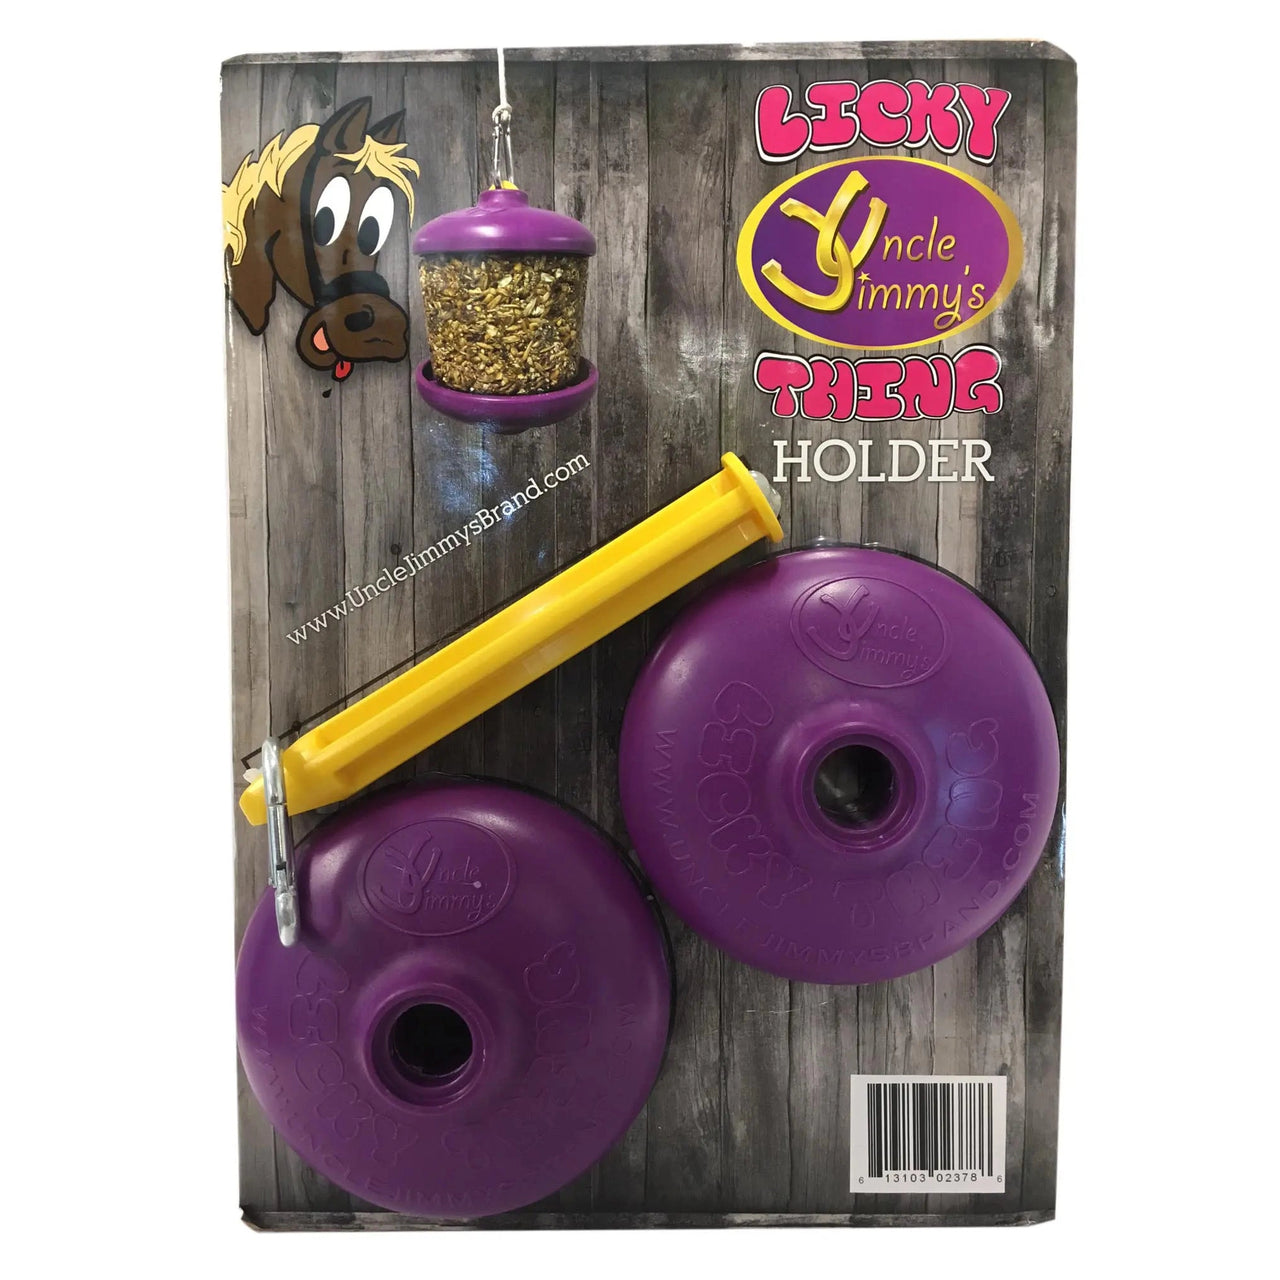 Uncle Jimmy's Licky Thing Holder w/Pin